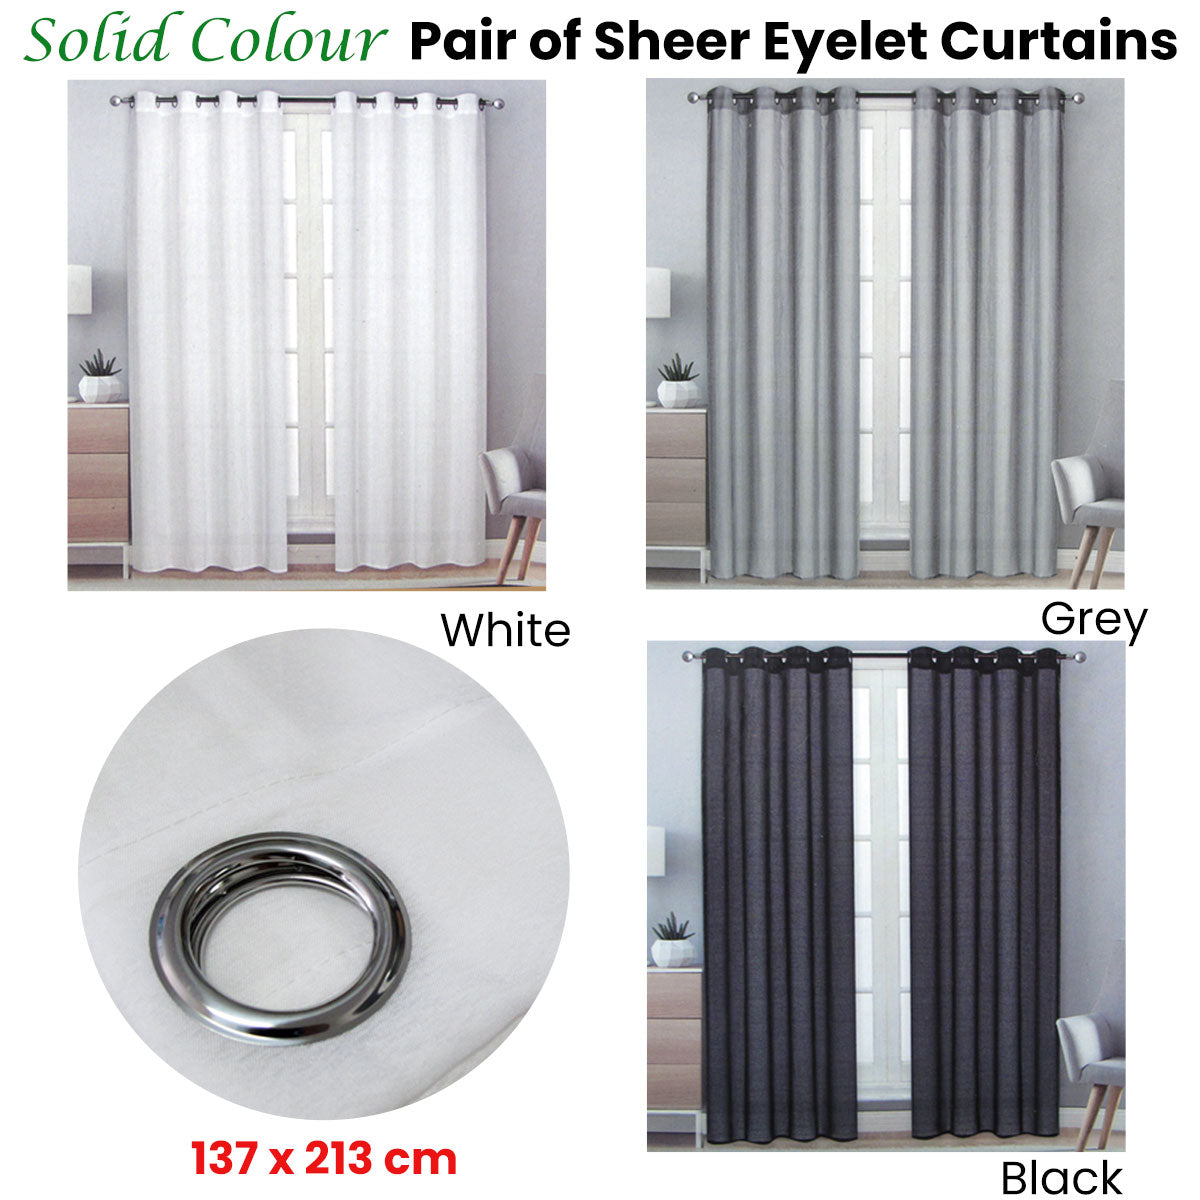 Pair of Solid Colour Sheer Eyelet Curtains 137 x 213 cm White